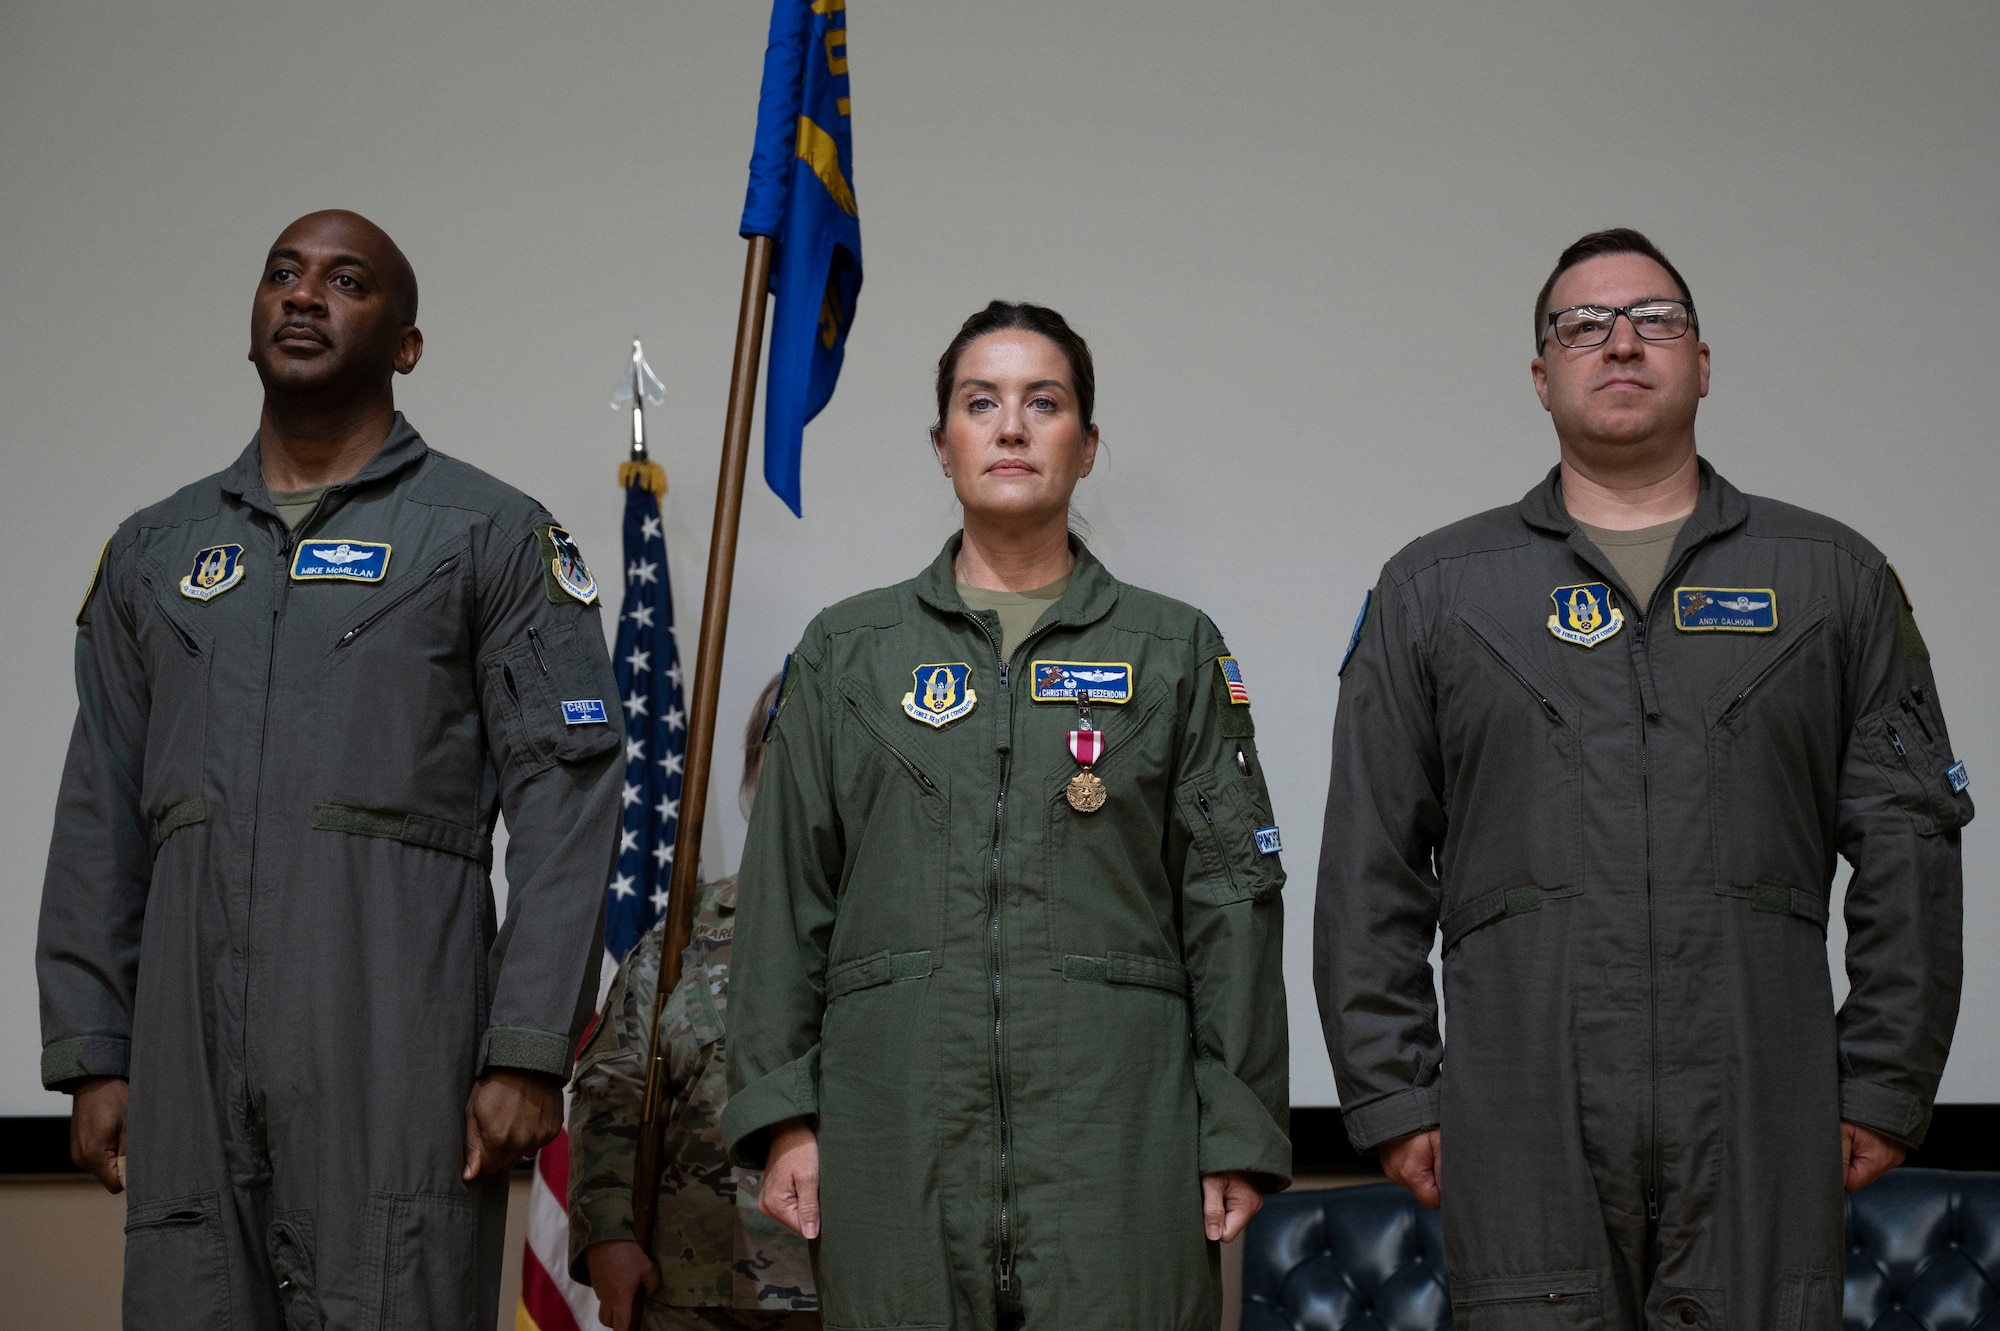 (From left to right) U.S. Air Force Col. Michael McMillan, 340th Flying Training Group director of operations, Lt. Col. Christine Van Weezendonk, former 96th Flying Training Squadron commander, and Lt. Col. Andrew Calhoun, current 96th FTS commander, stand at attention during the publication of the change of command orders during the 96th FTS change of command ceremony at Laughlin Air Force Base, Texas, May 10, 2024. Change of command ceremonies represent a formal transfer of authority and responsibility for a unit from one commanding officer to another. (U.S. Air Force photo by Senior Airman Kailee Reynolds)